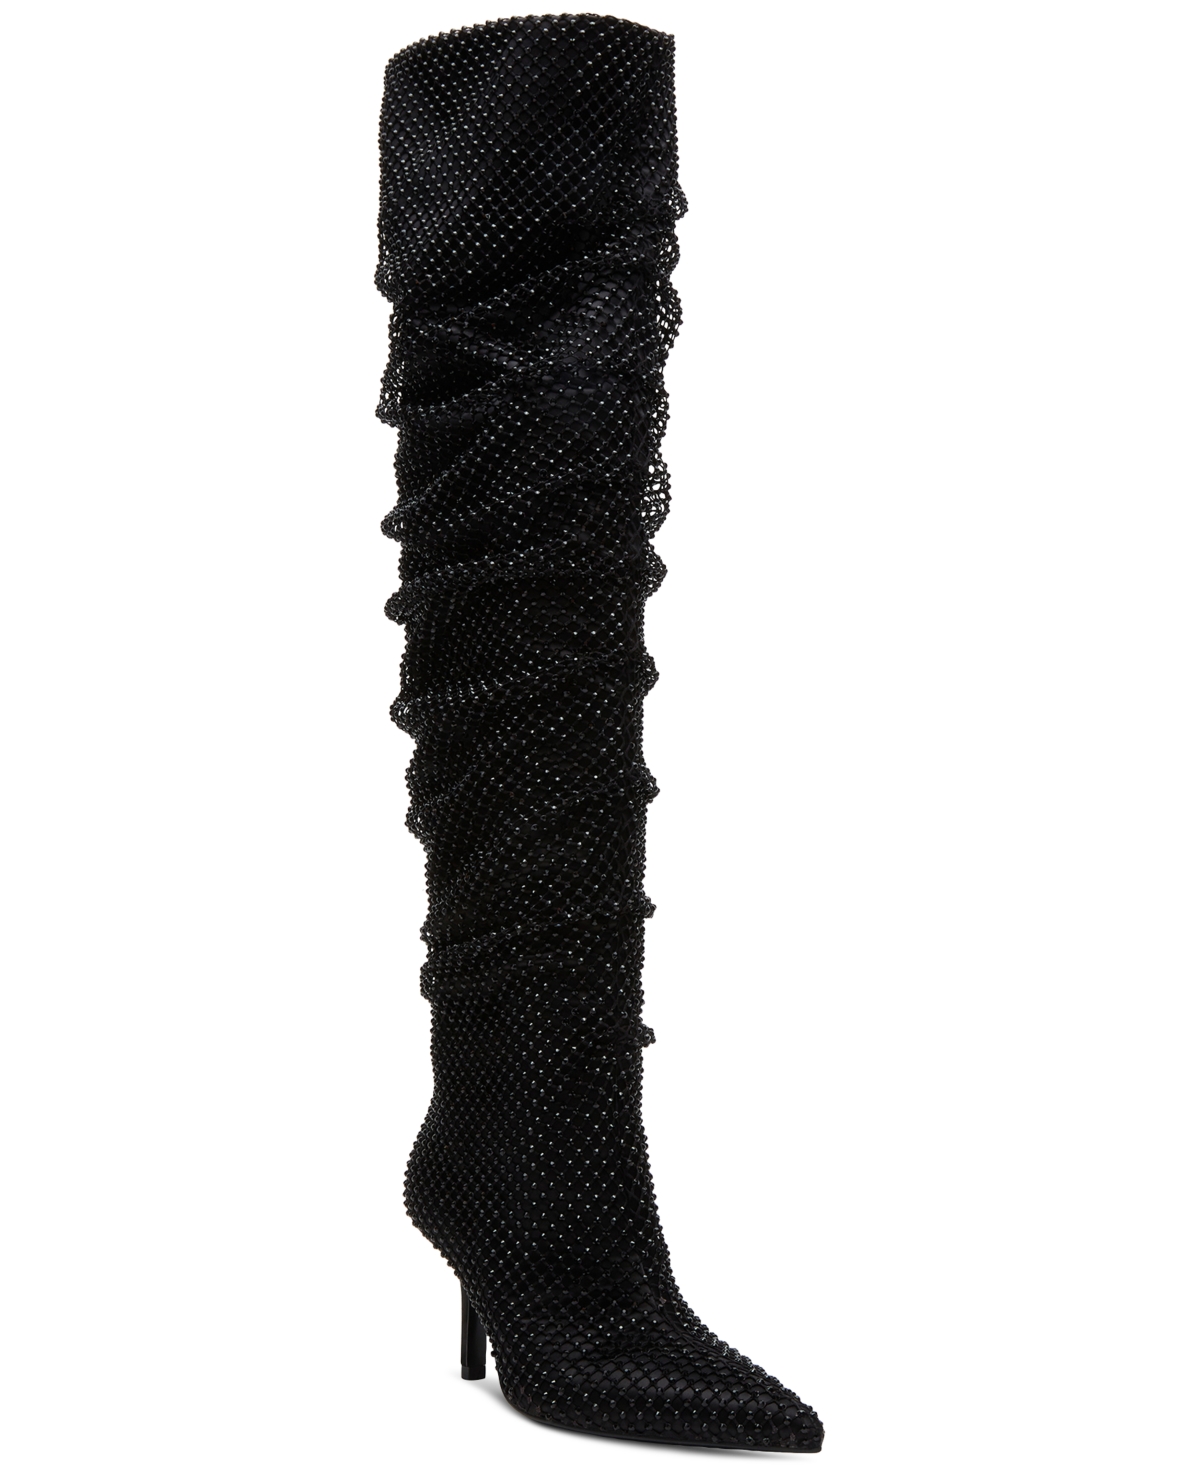 Sasha Fishnet Slouch Over-The-Knee Boots - Black